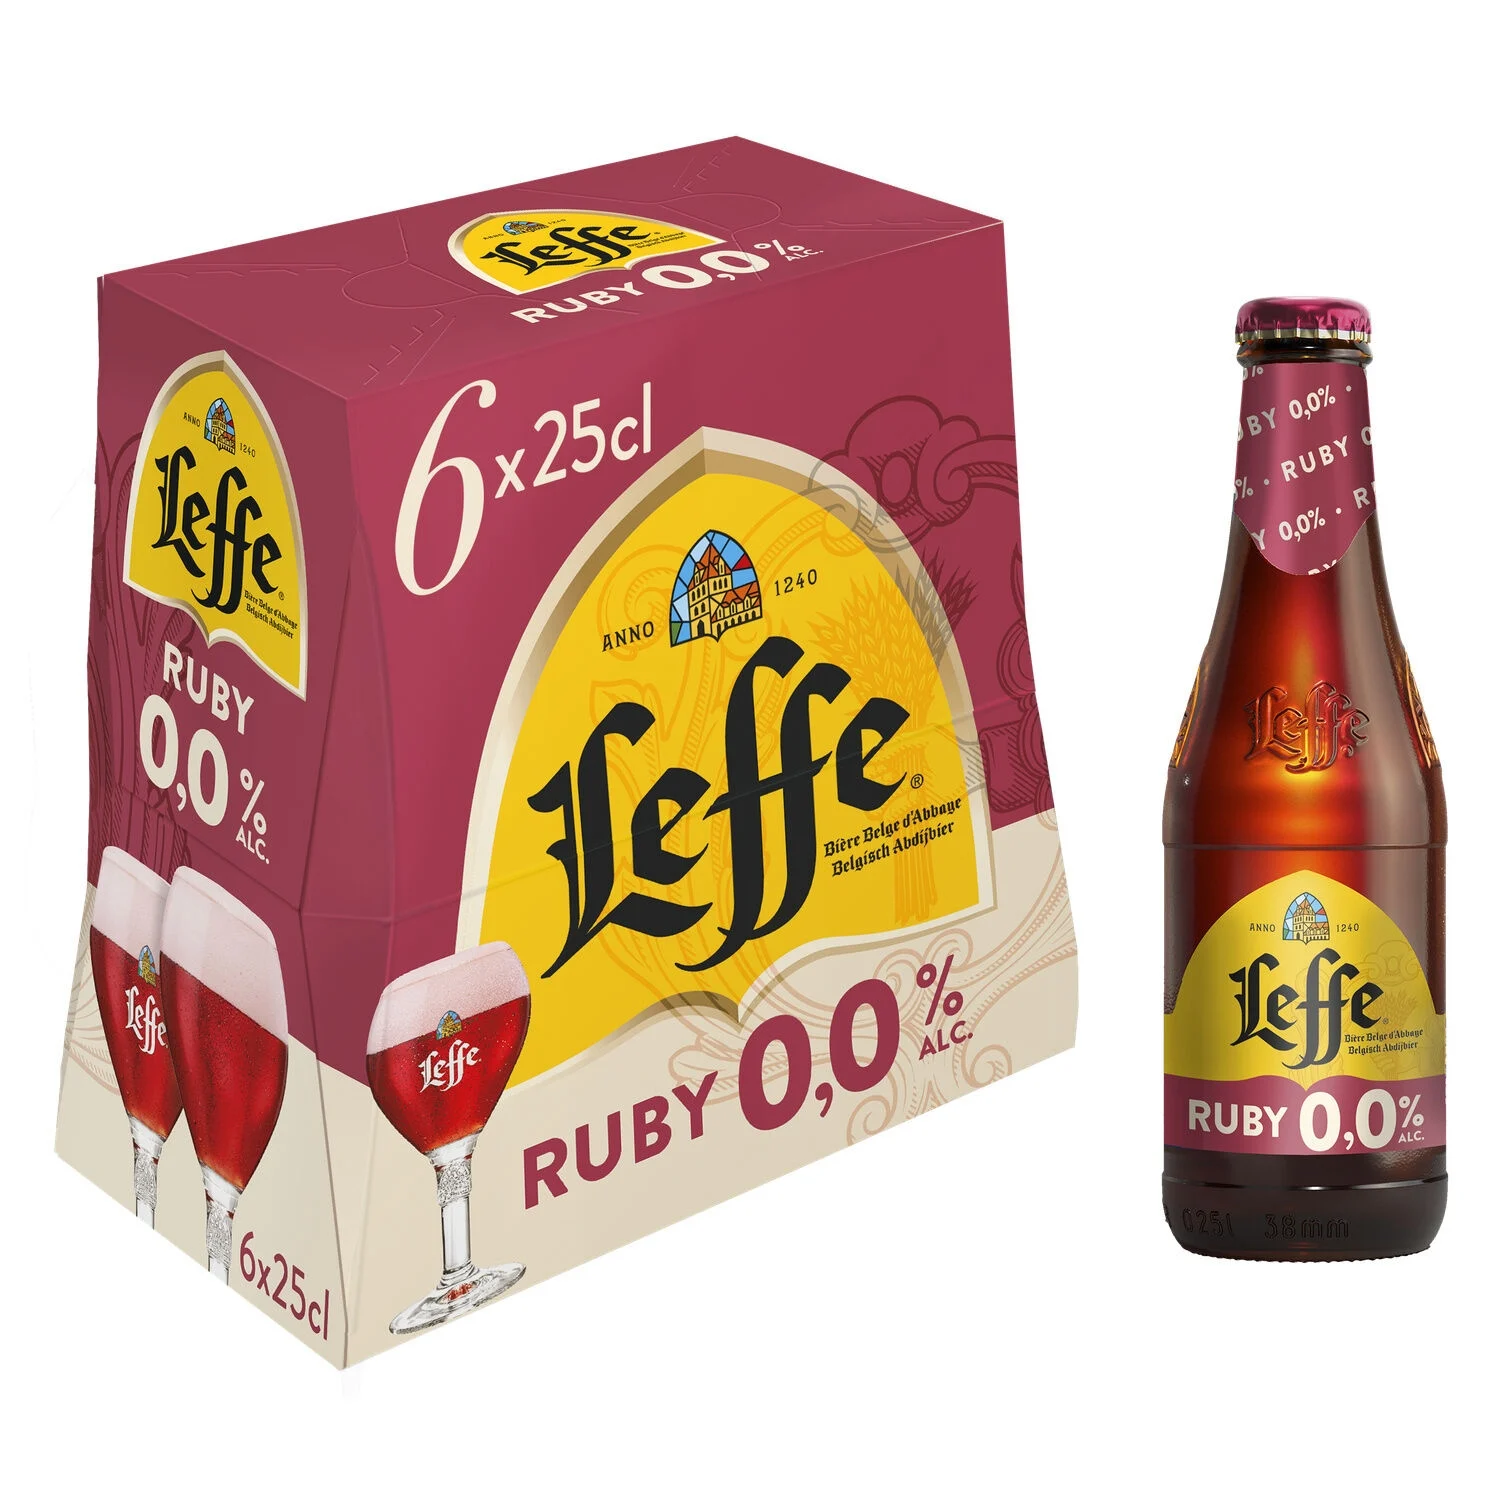 Ruby Non-Alcoholic Beer, 6x25cl - LEFFE